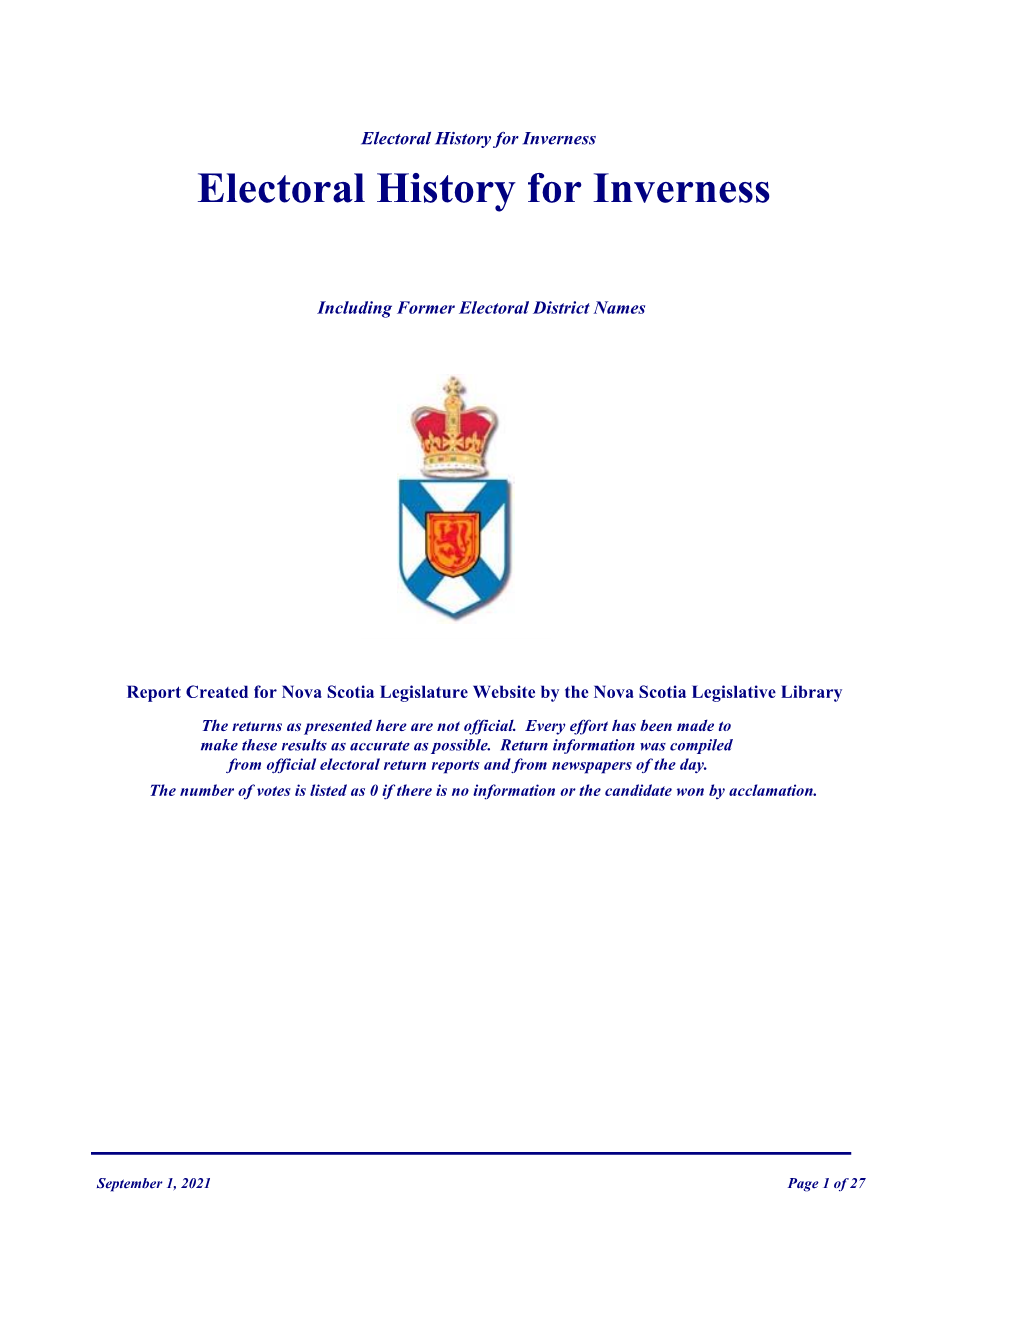 Inverness Electoral History for Inverness